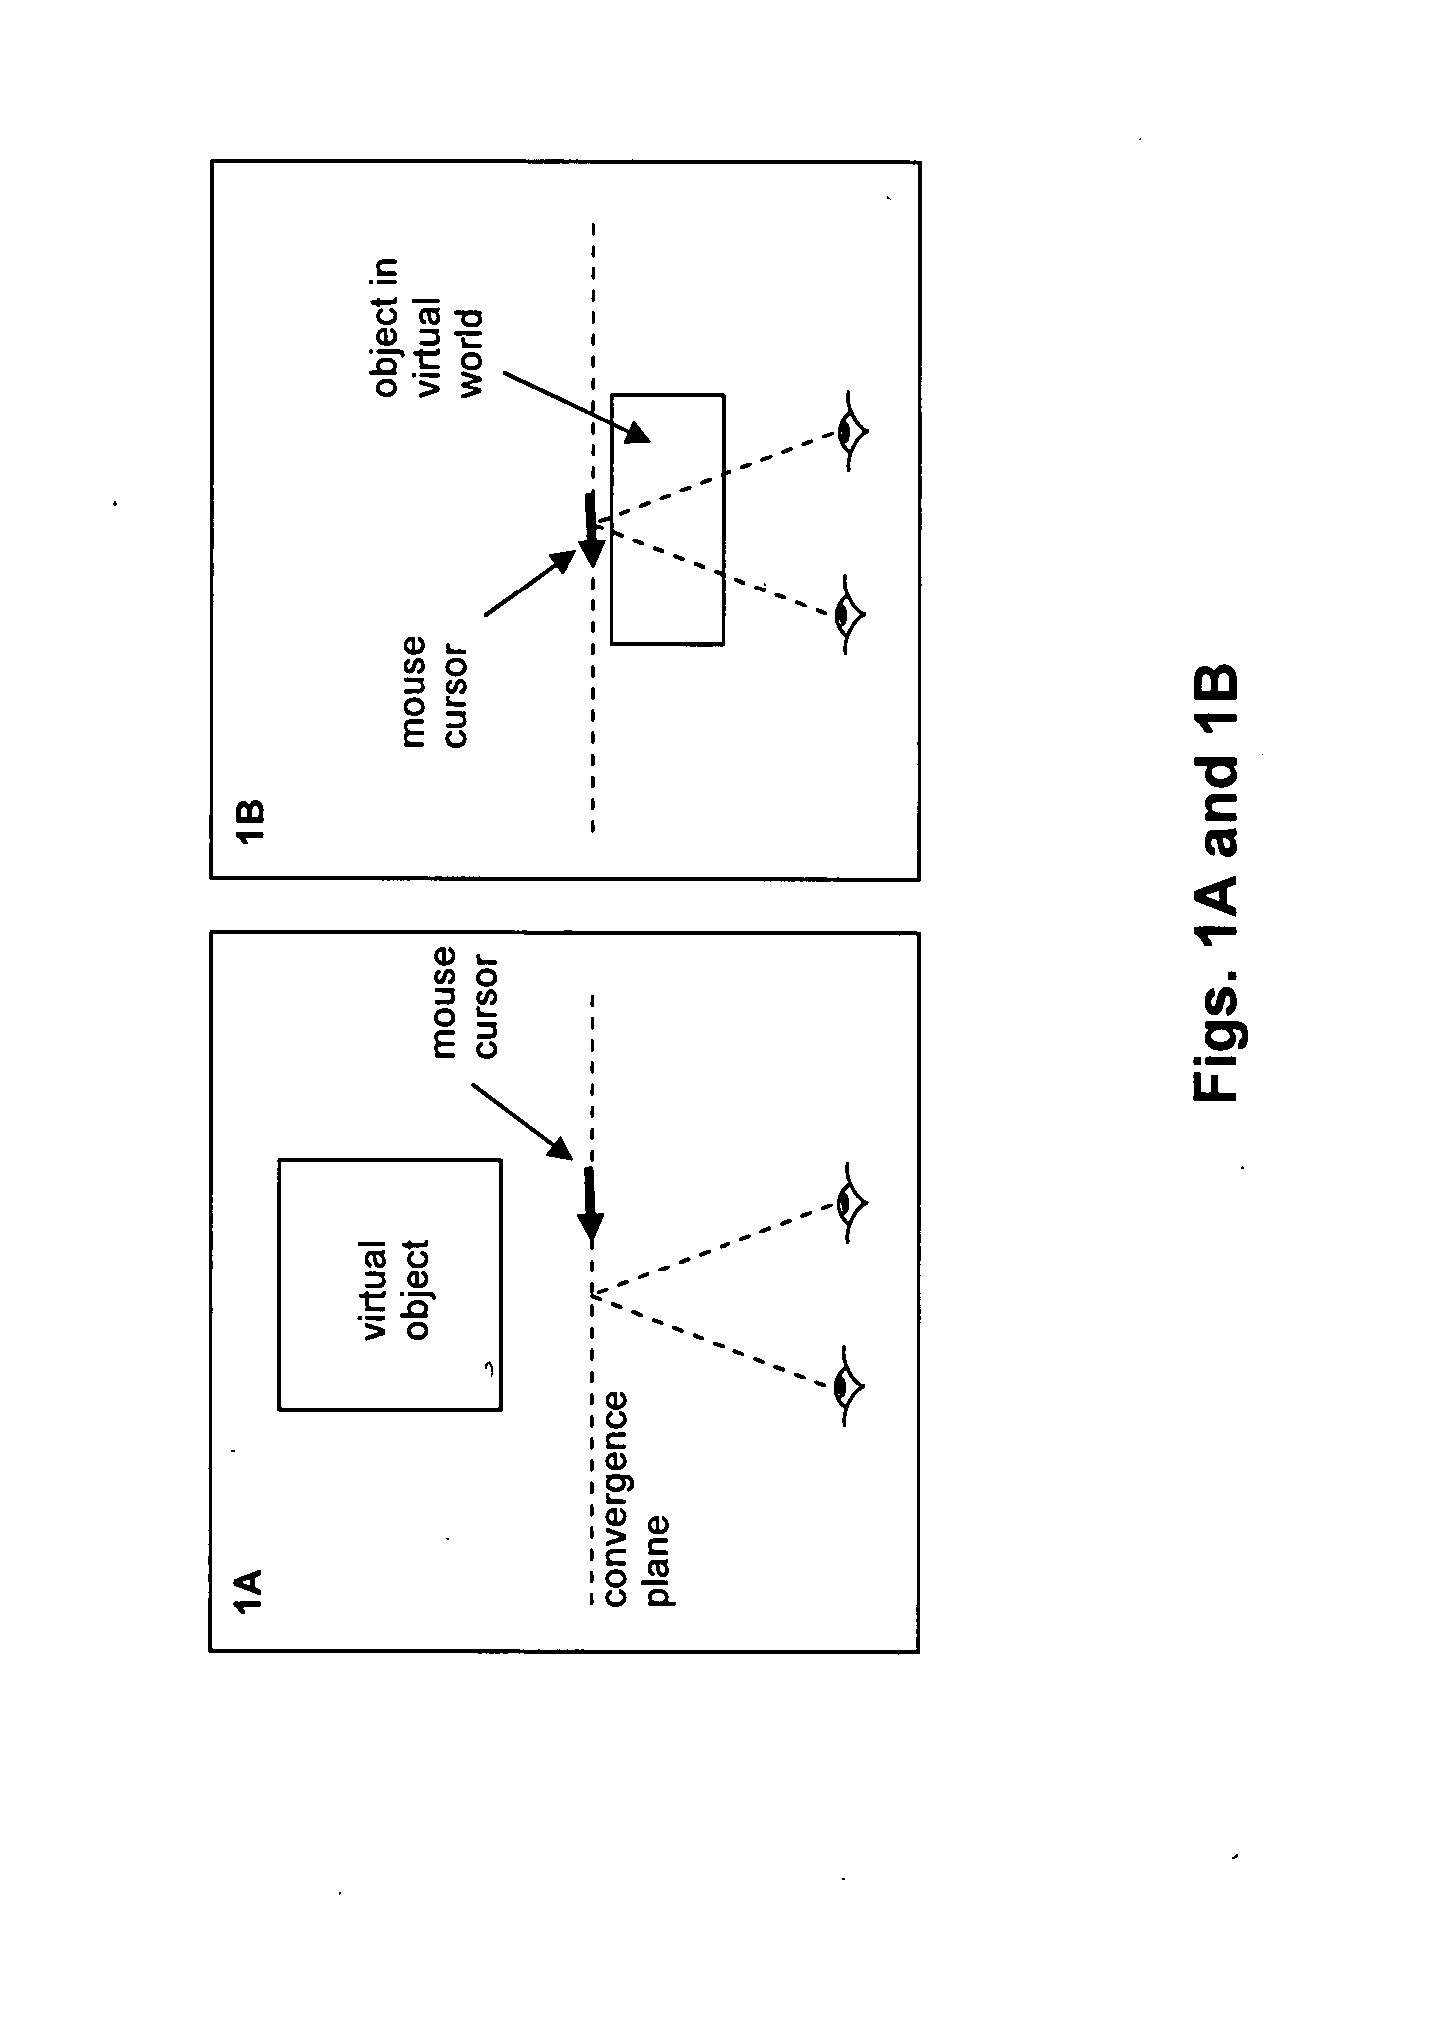 Methods and systems for interacting with a 3D visualization system using a 2D interface ("DextroLap")